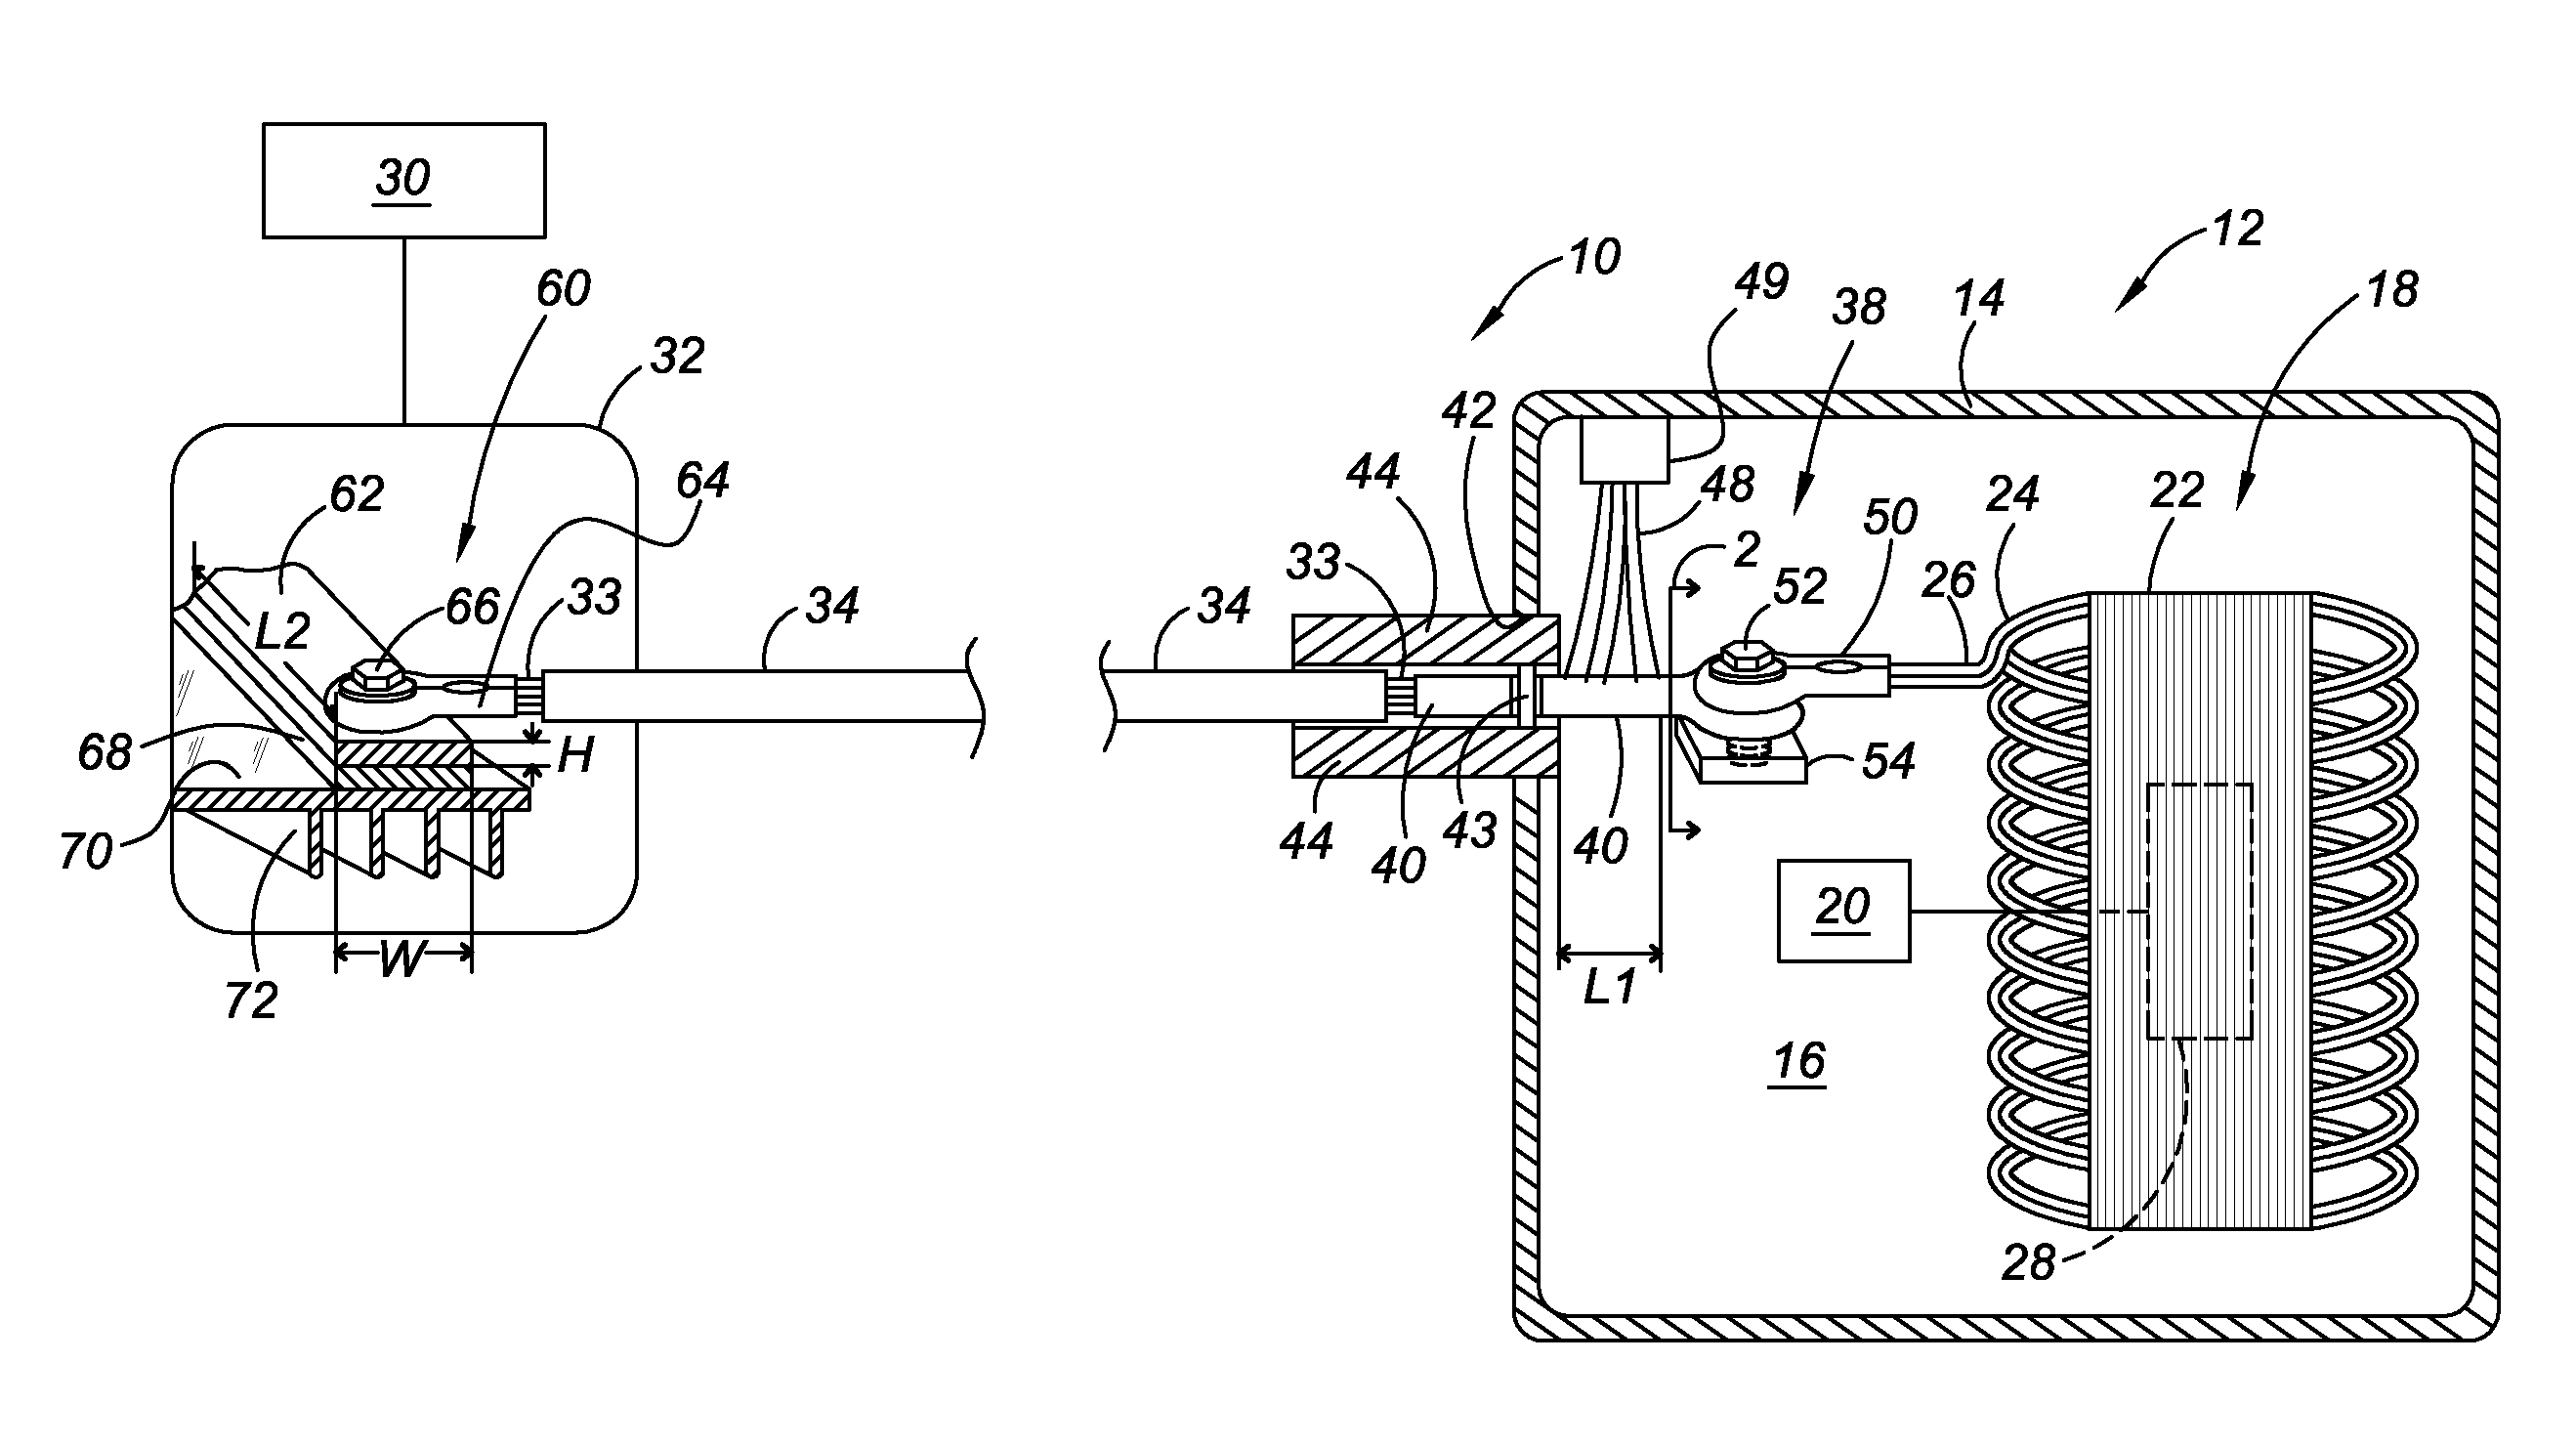 Electric motor power connection assembly